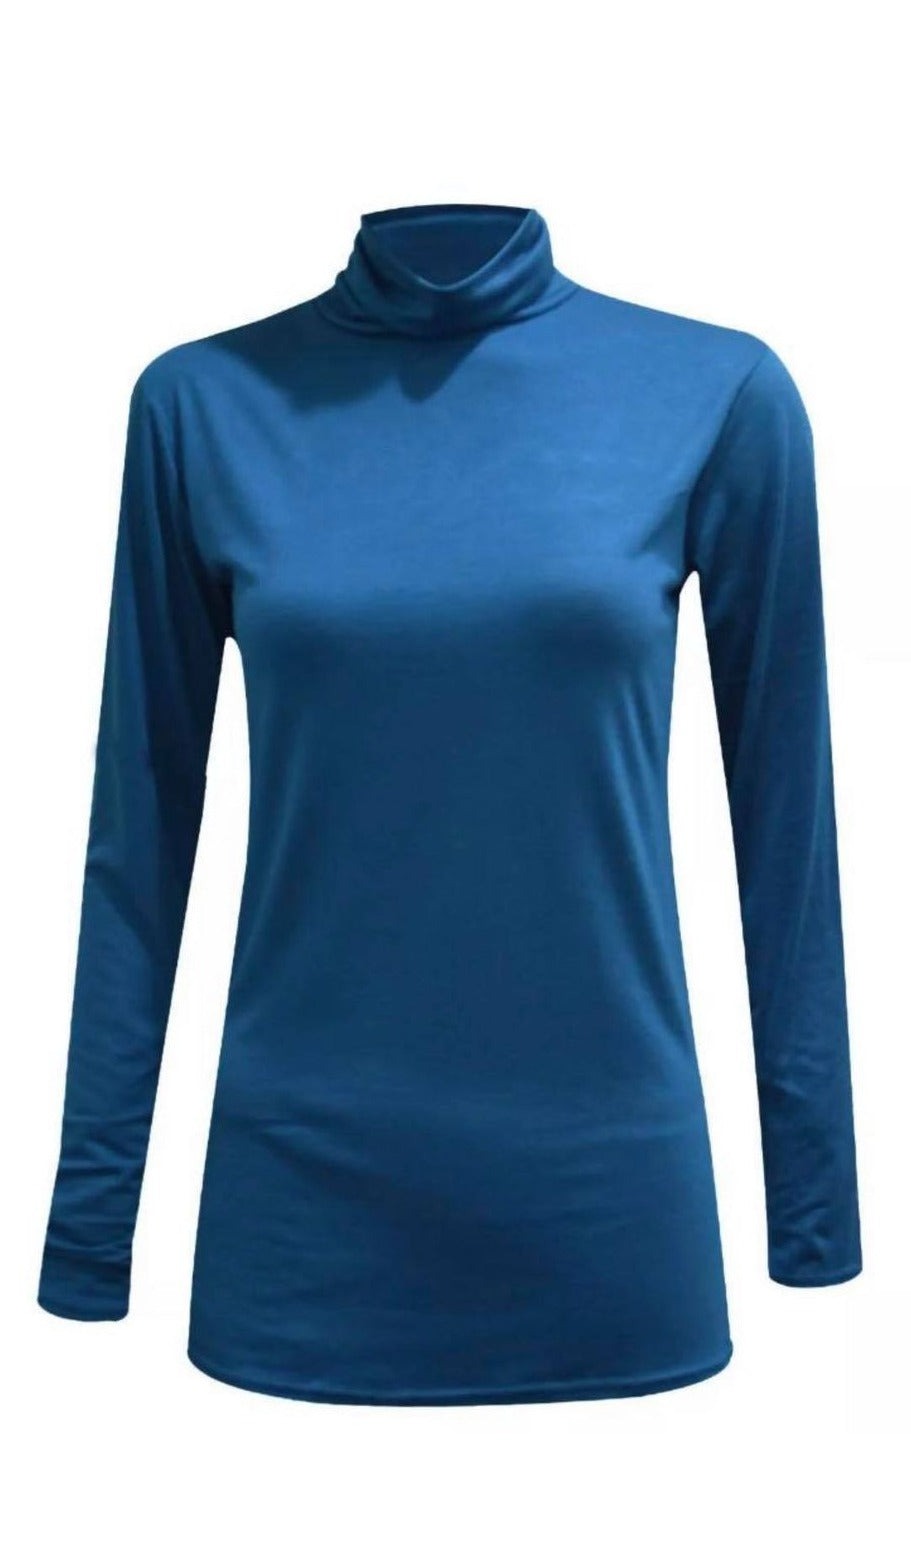 Teal Long Sleeved Jersey Turtle Neck Top